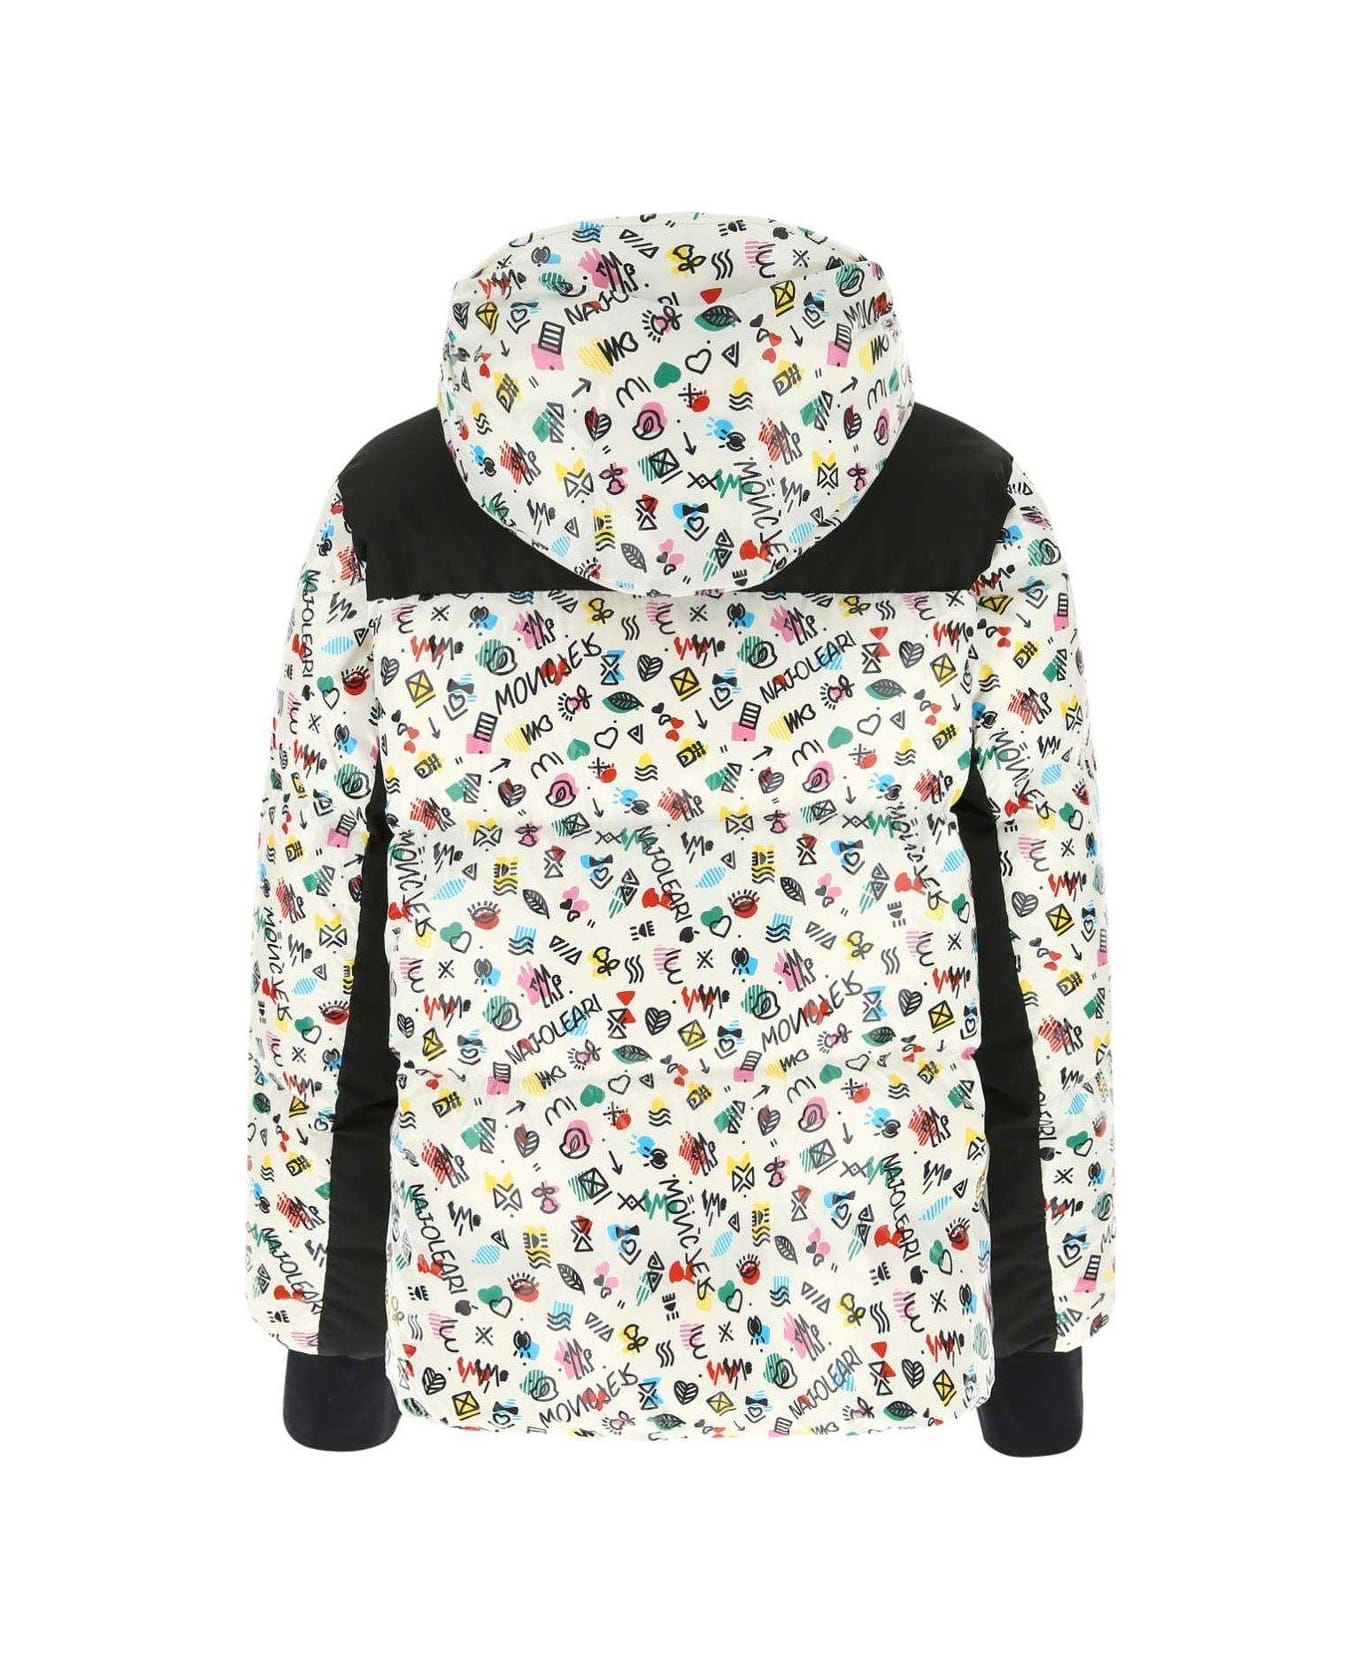 Moncler Grenoble Printed Puffer Jacket - MULTICOLOR